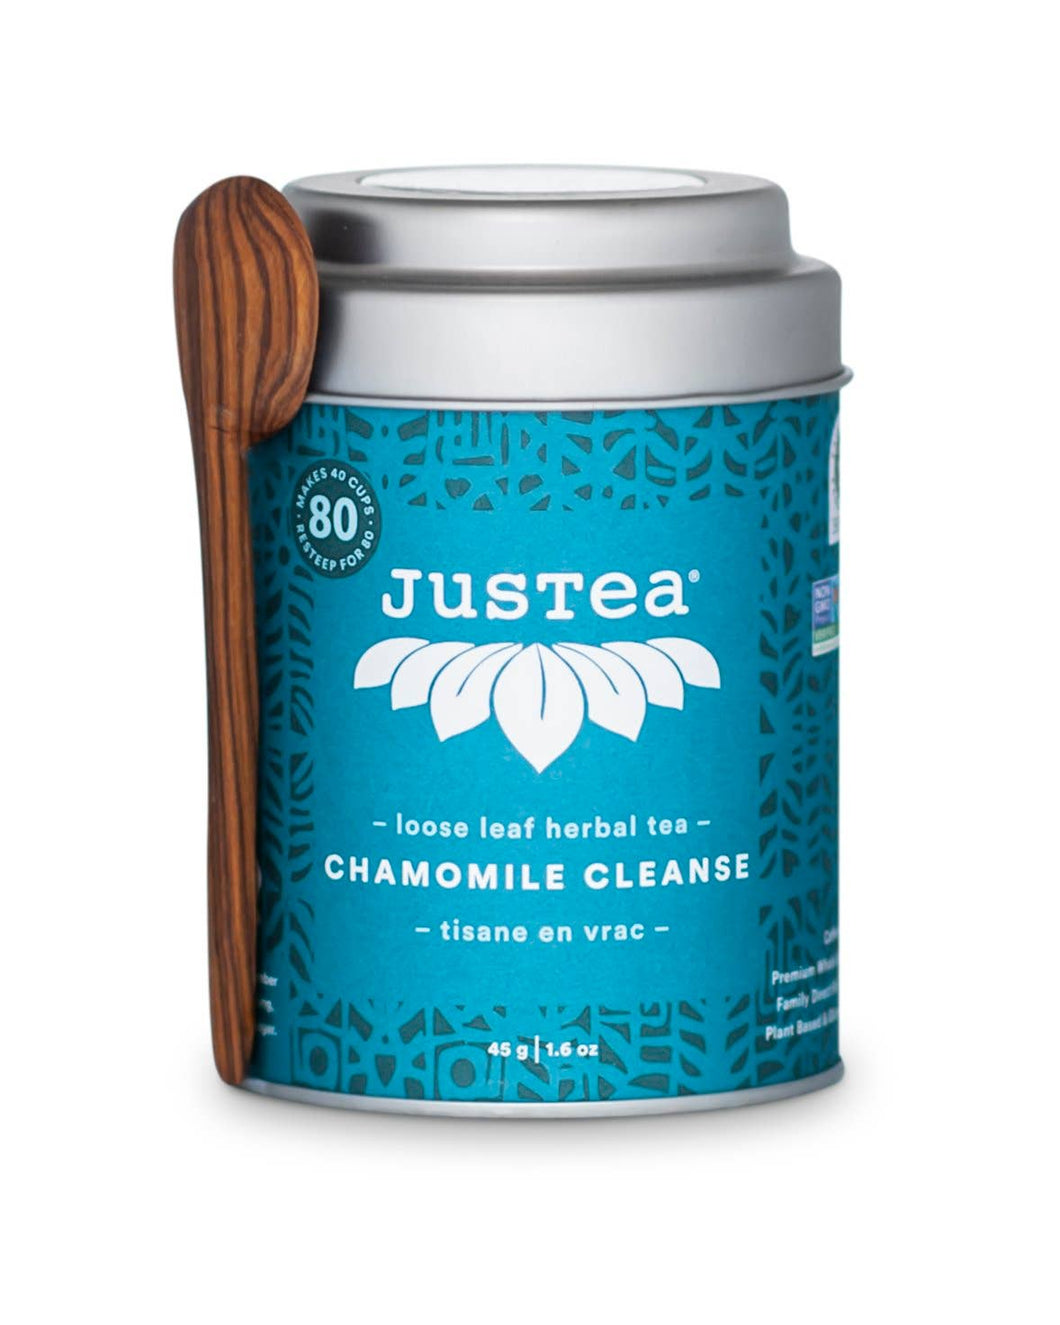 JusTea Chamomile Dream (Cleanse) Tin with Spoon